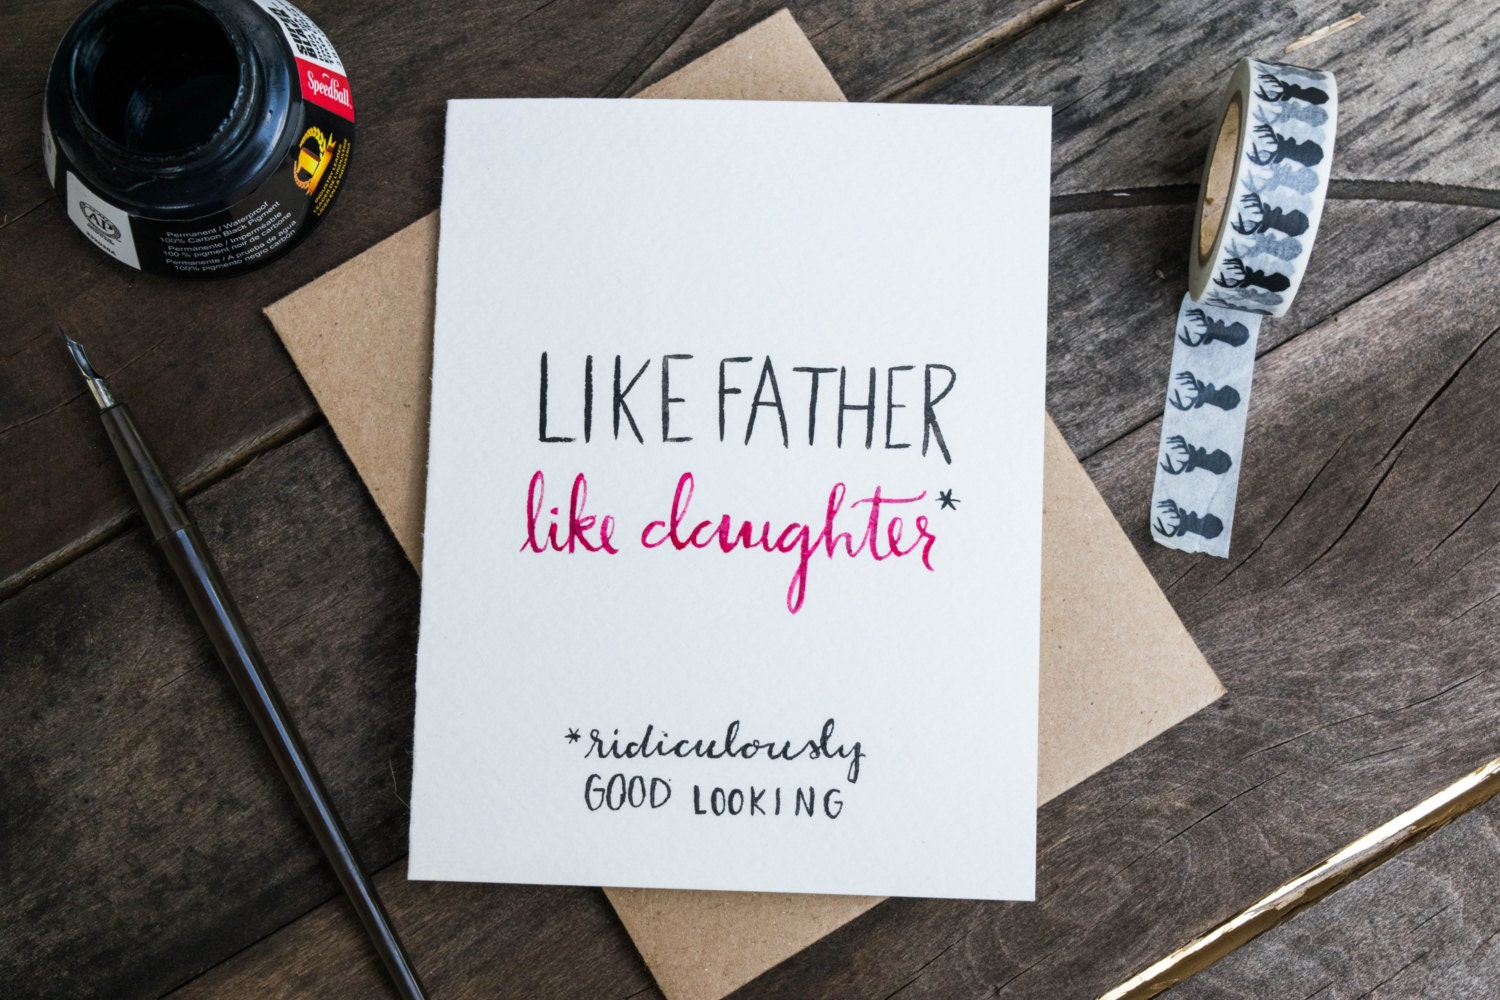 happy-birthday-dad-from-daughter-cards-heart-touching-77-happy